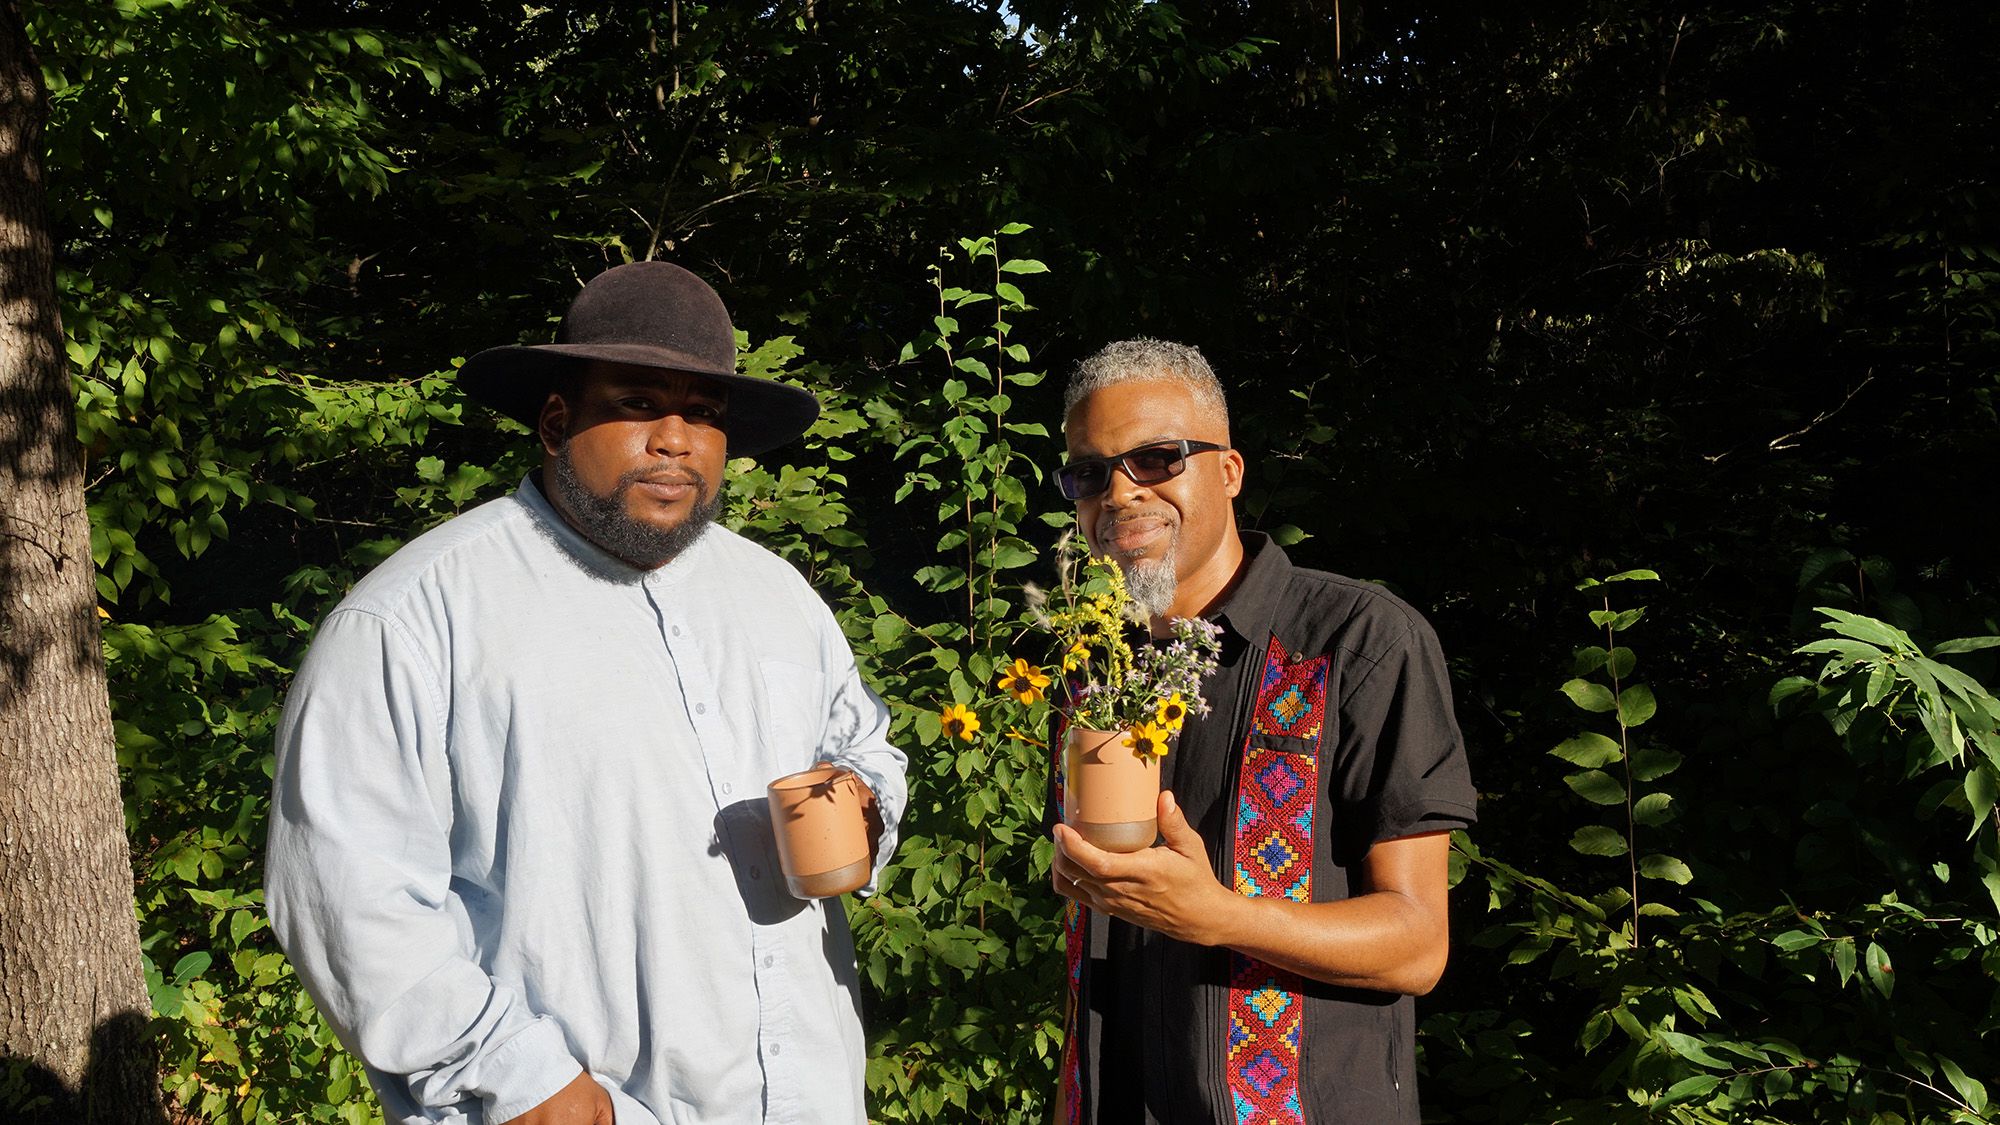 Two people standing in bright sun in front of green foliage, one wearing a light blue shirt with a black hat holding a mug and another wearing a black shirt and sunglasses holding a mug full of wildflowers